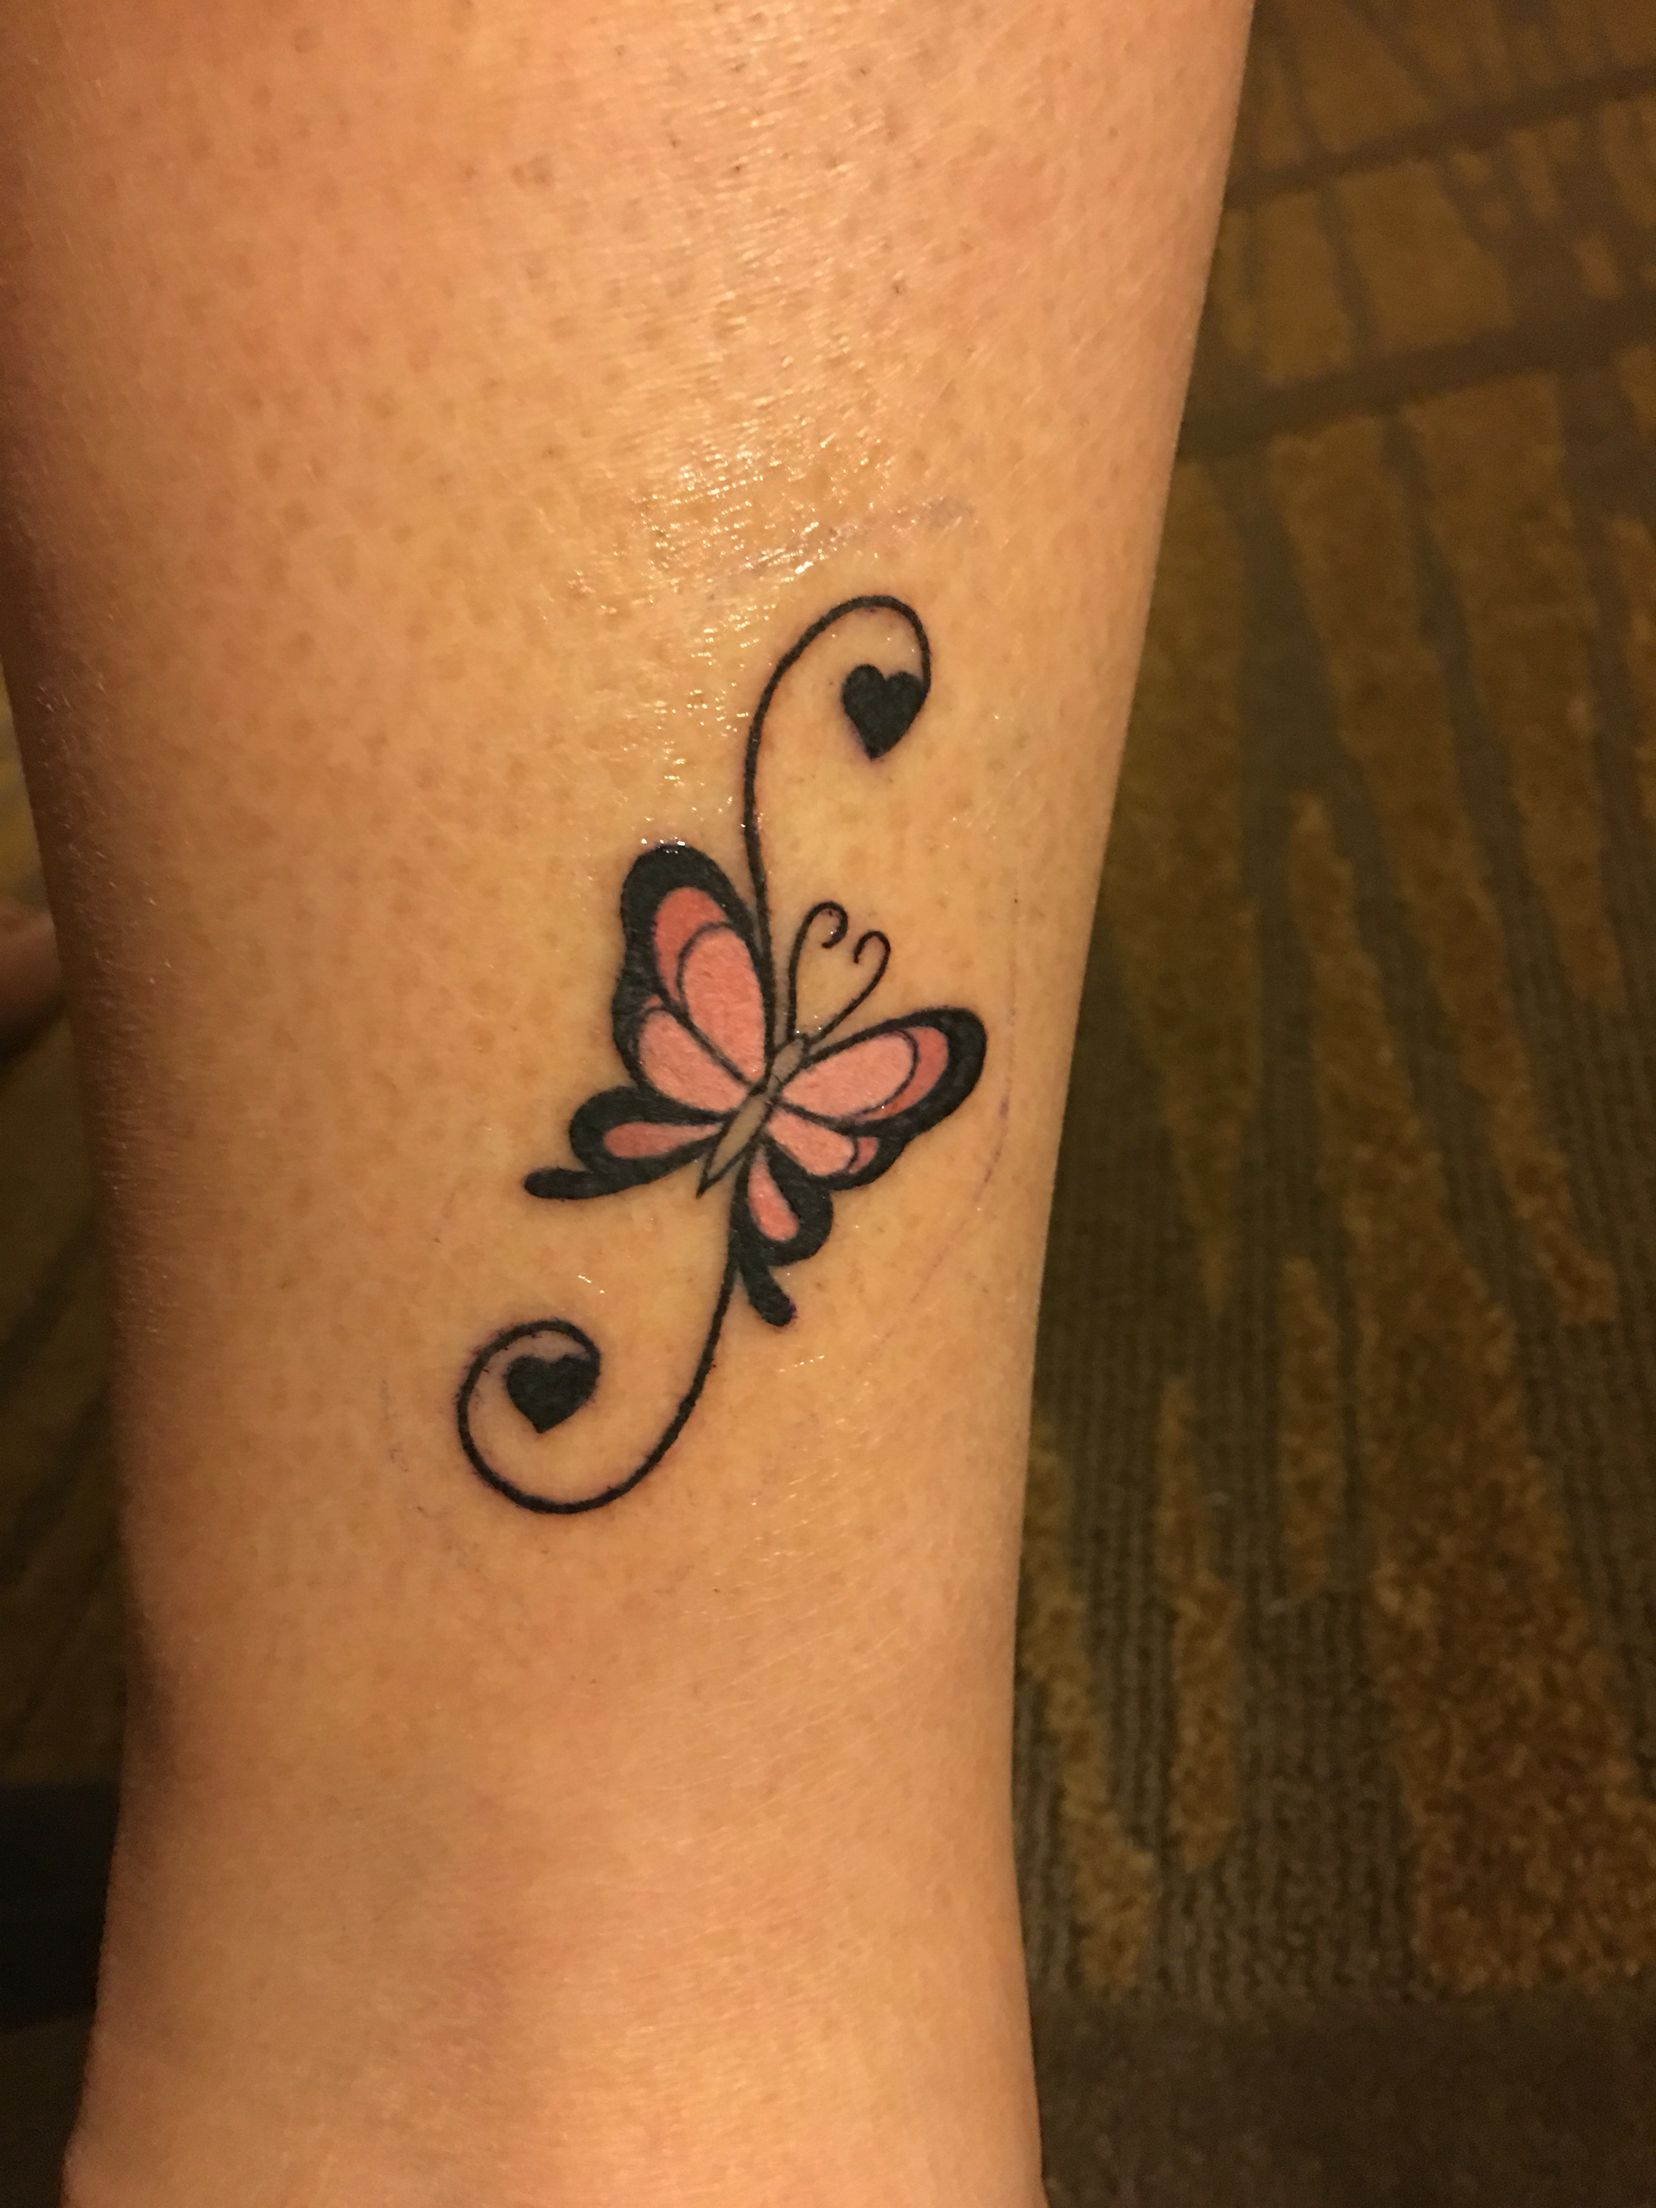 Feminine Butterfly Tattoo The Ankle With Swirls And Hearts The intended for dimensions 1656 X 2208